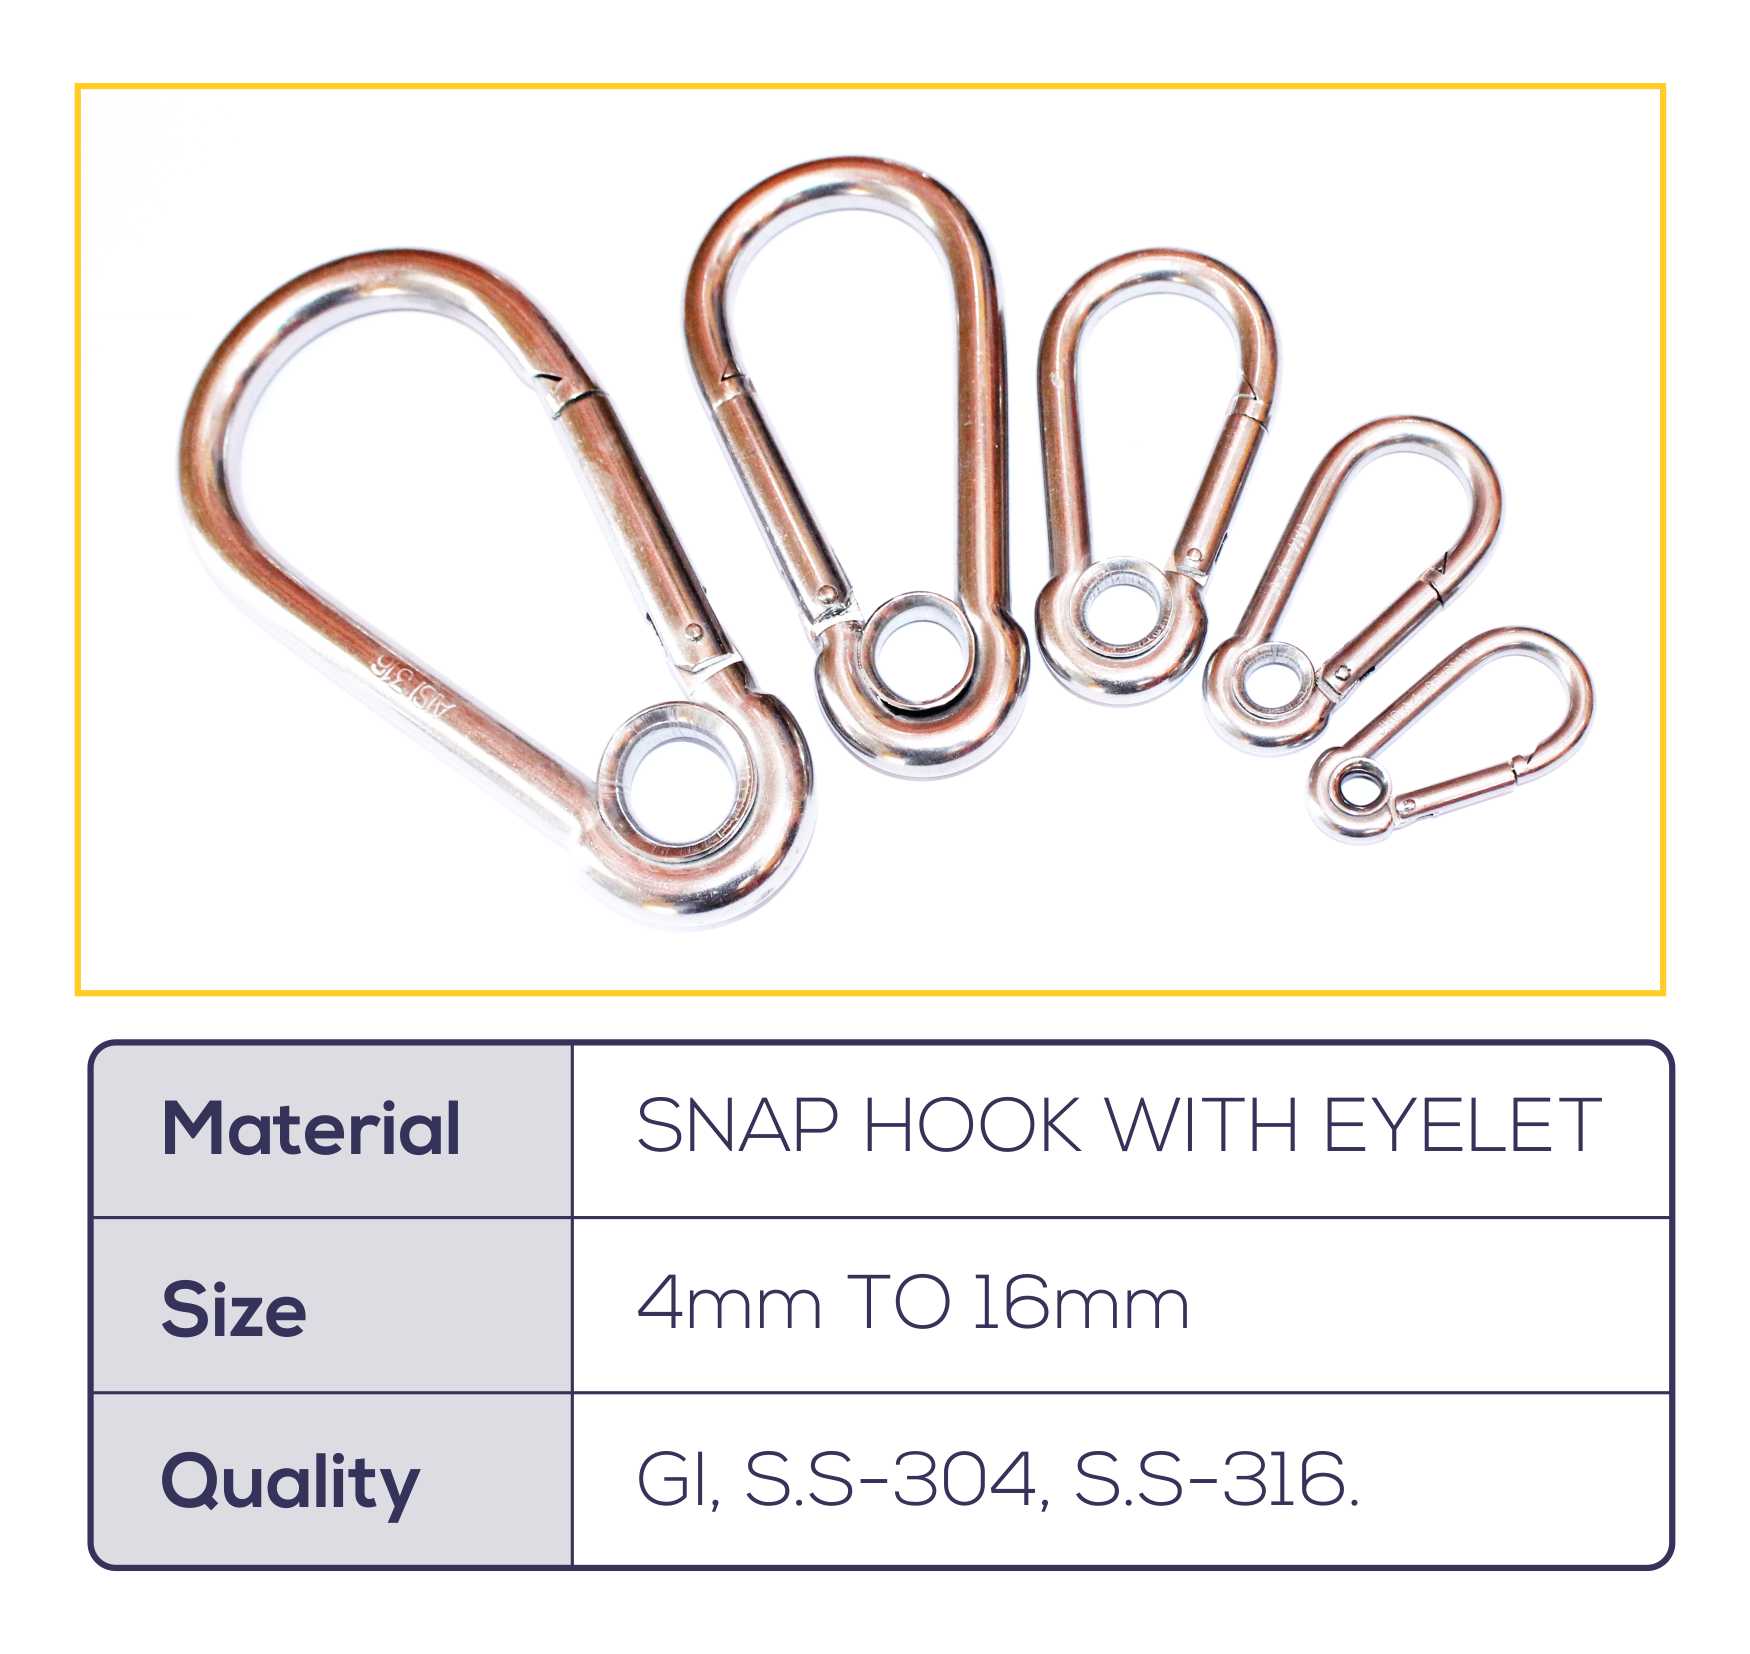 SNAP HOOK WITH EYELET